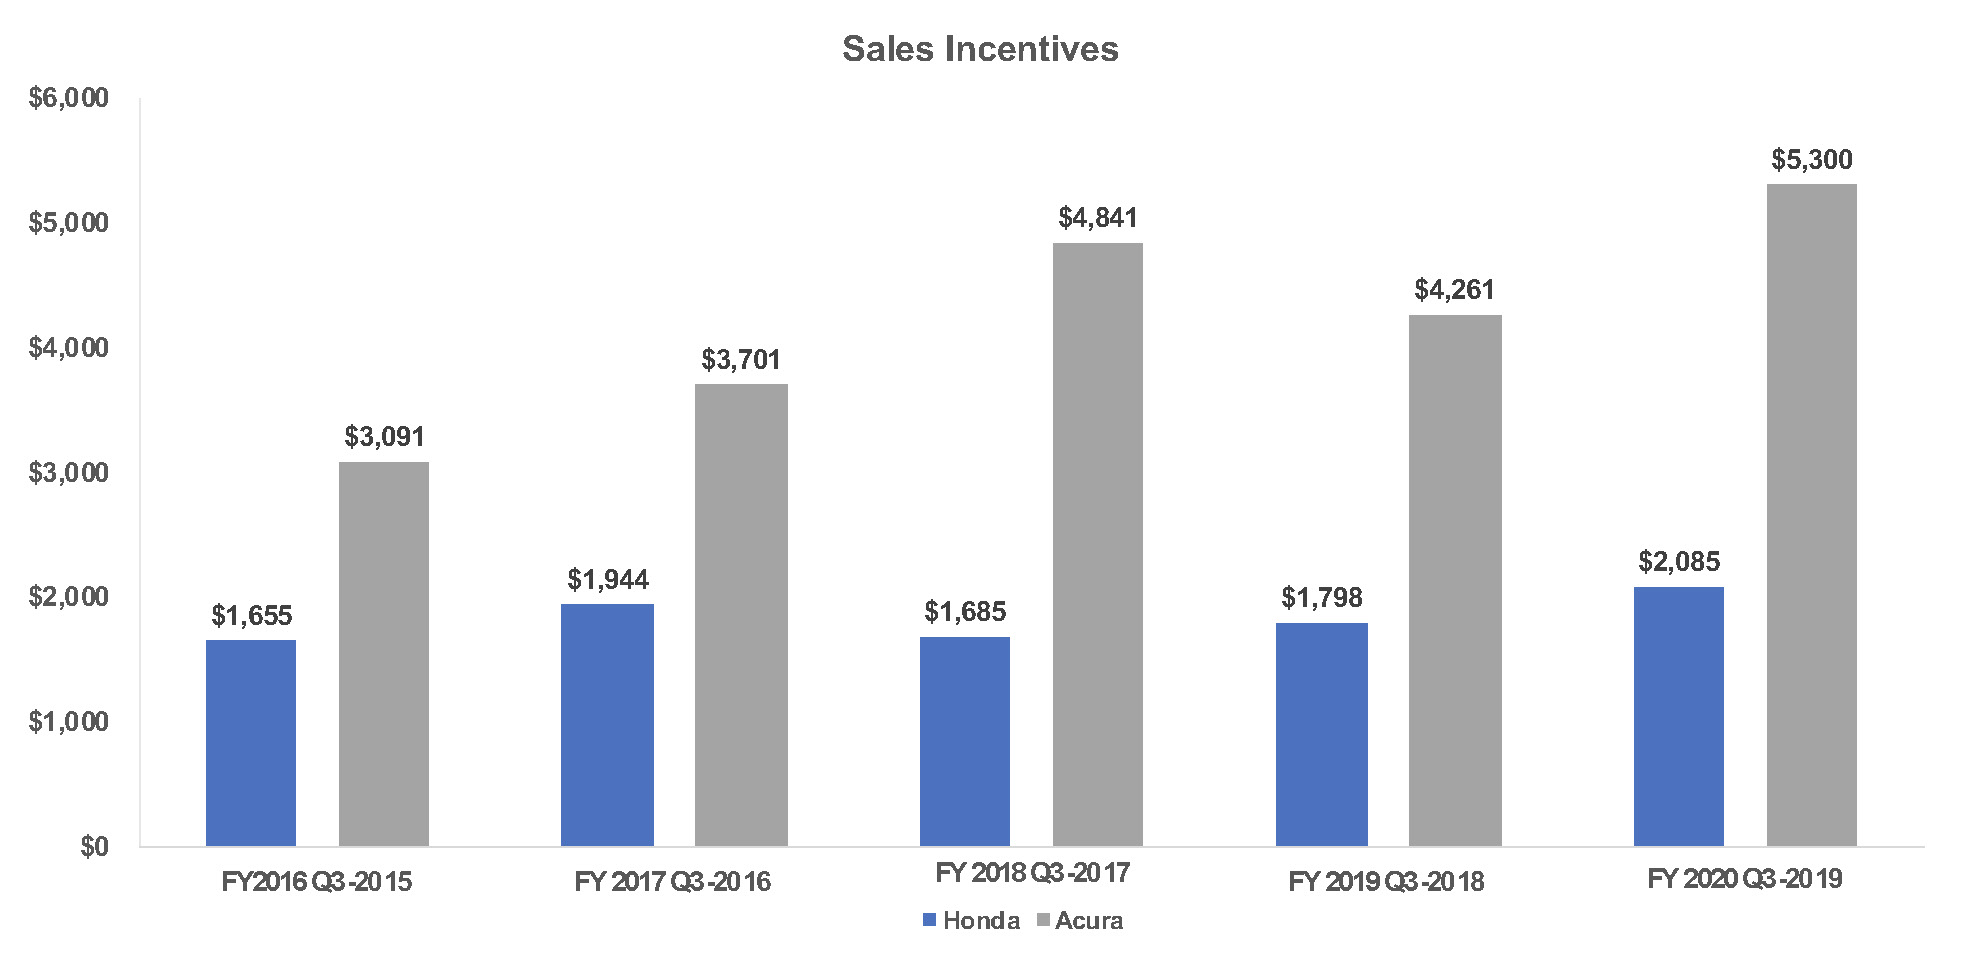 honda-incentives-rise-prices-drop-and-sales-barely-increase-in-the-u-s-cox-automotive-inc